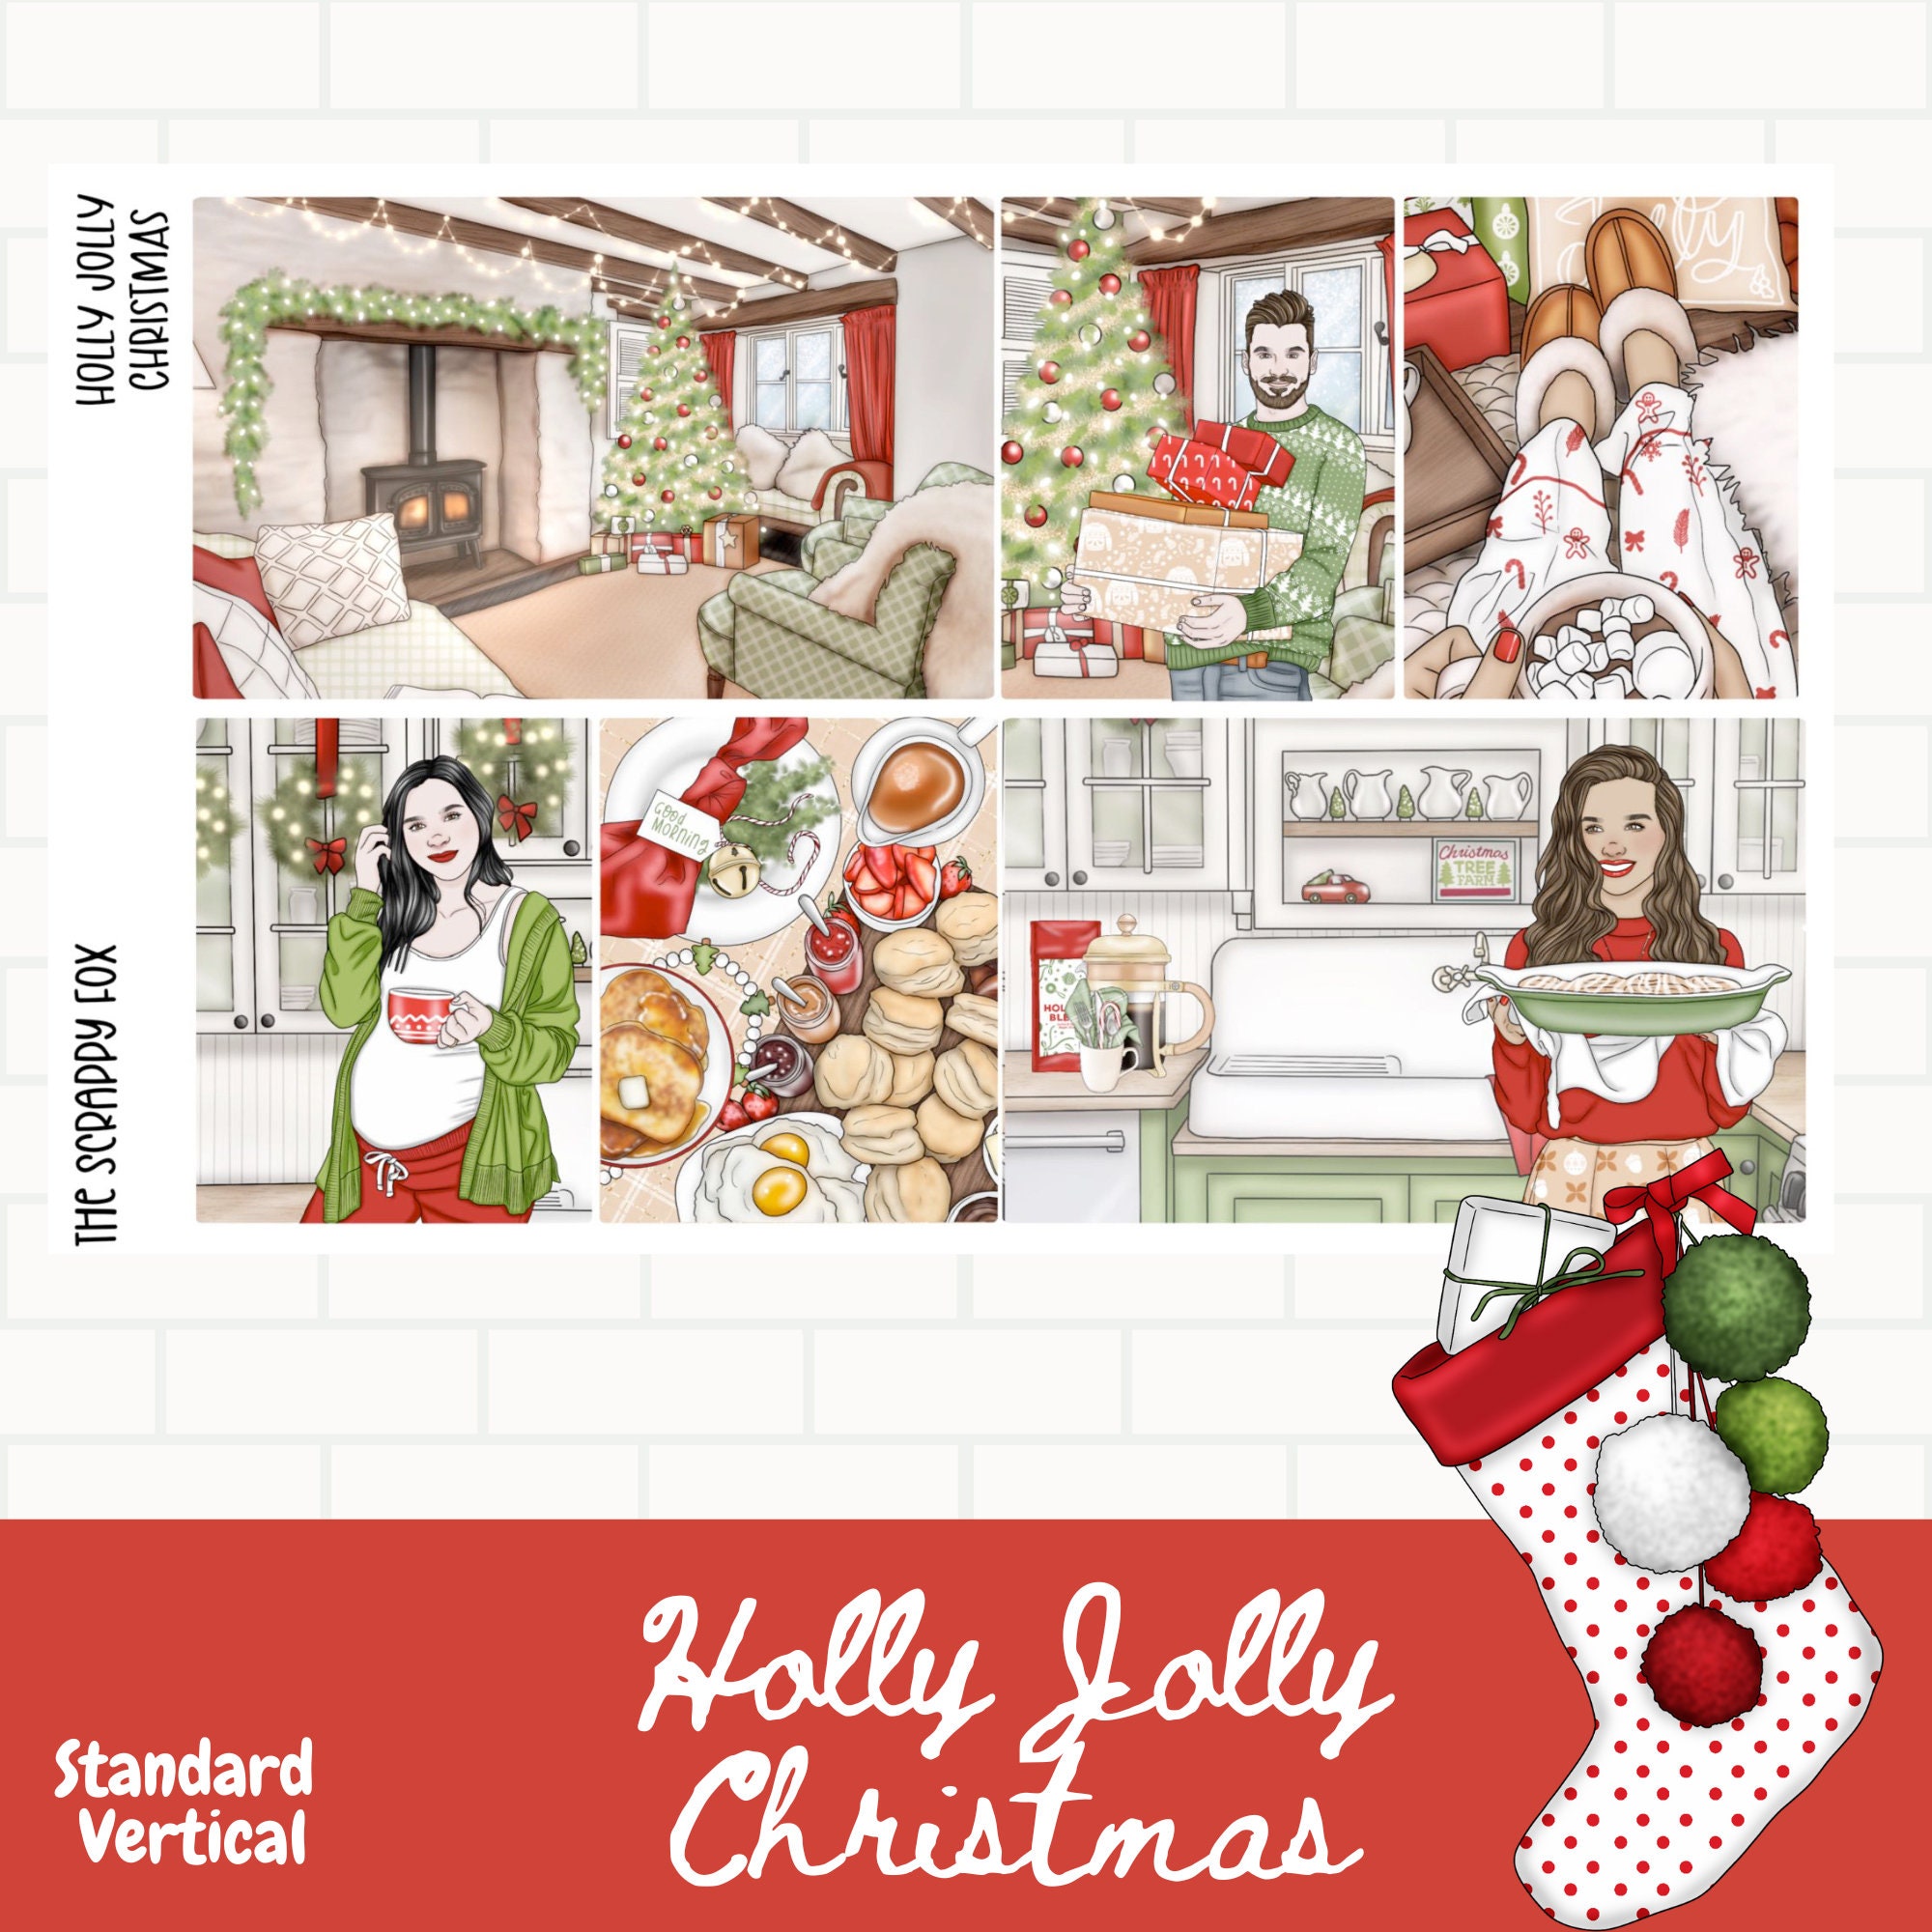 The Best Christmas Planner Stickers